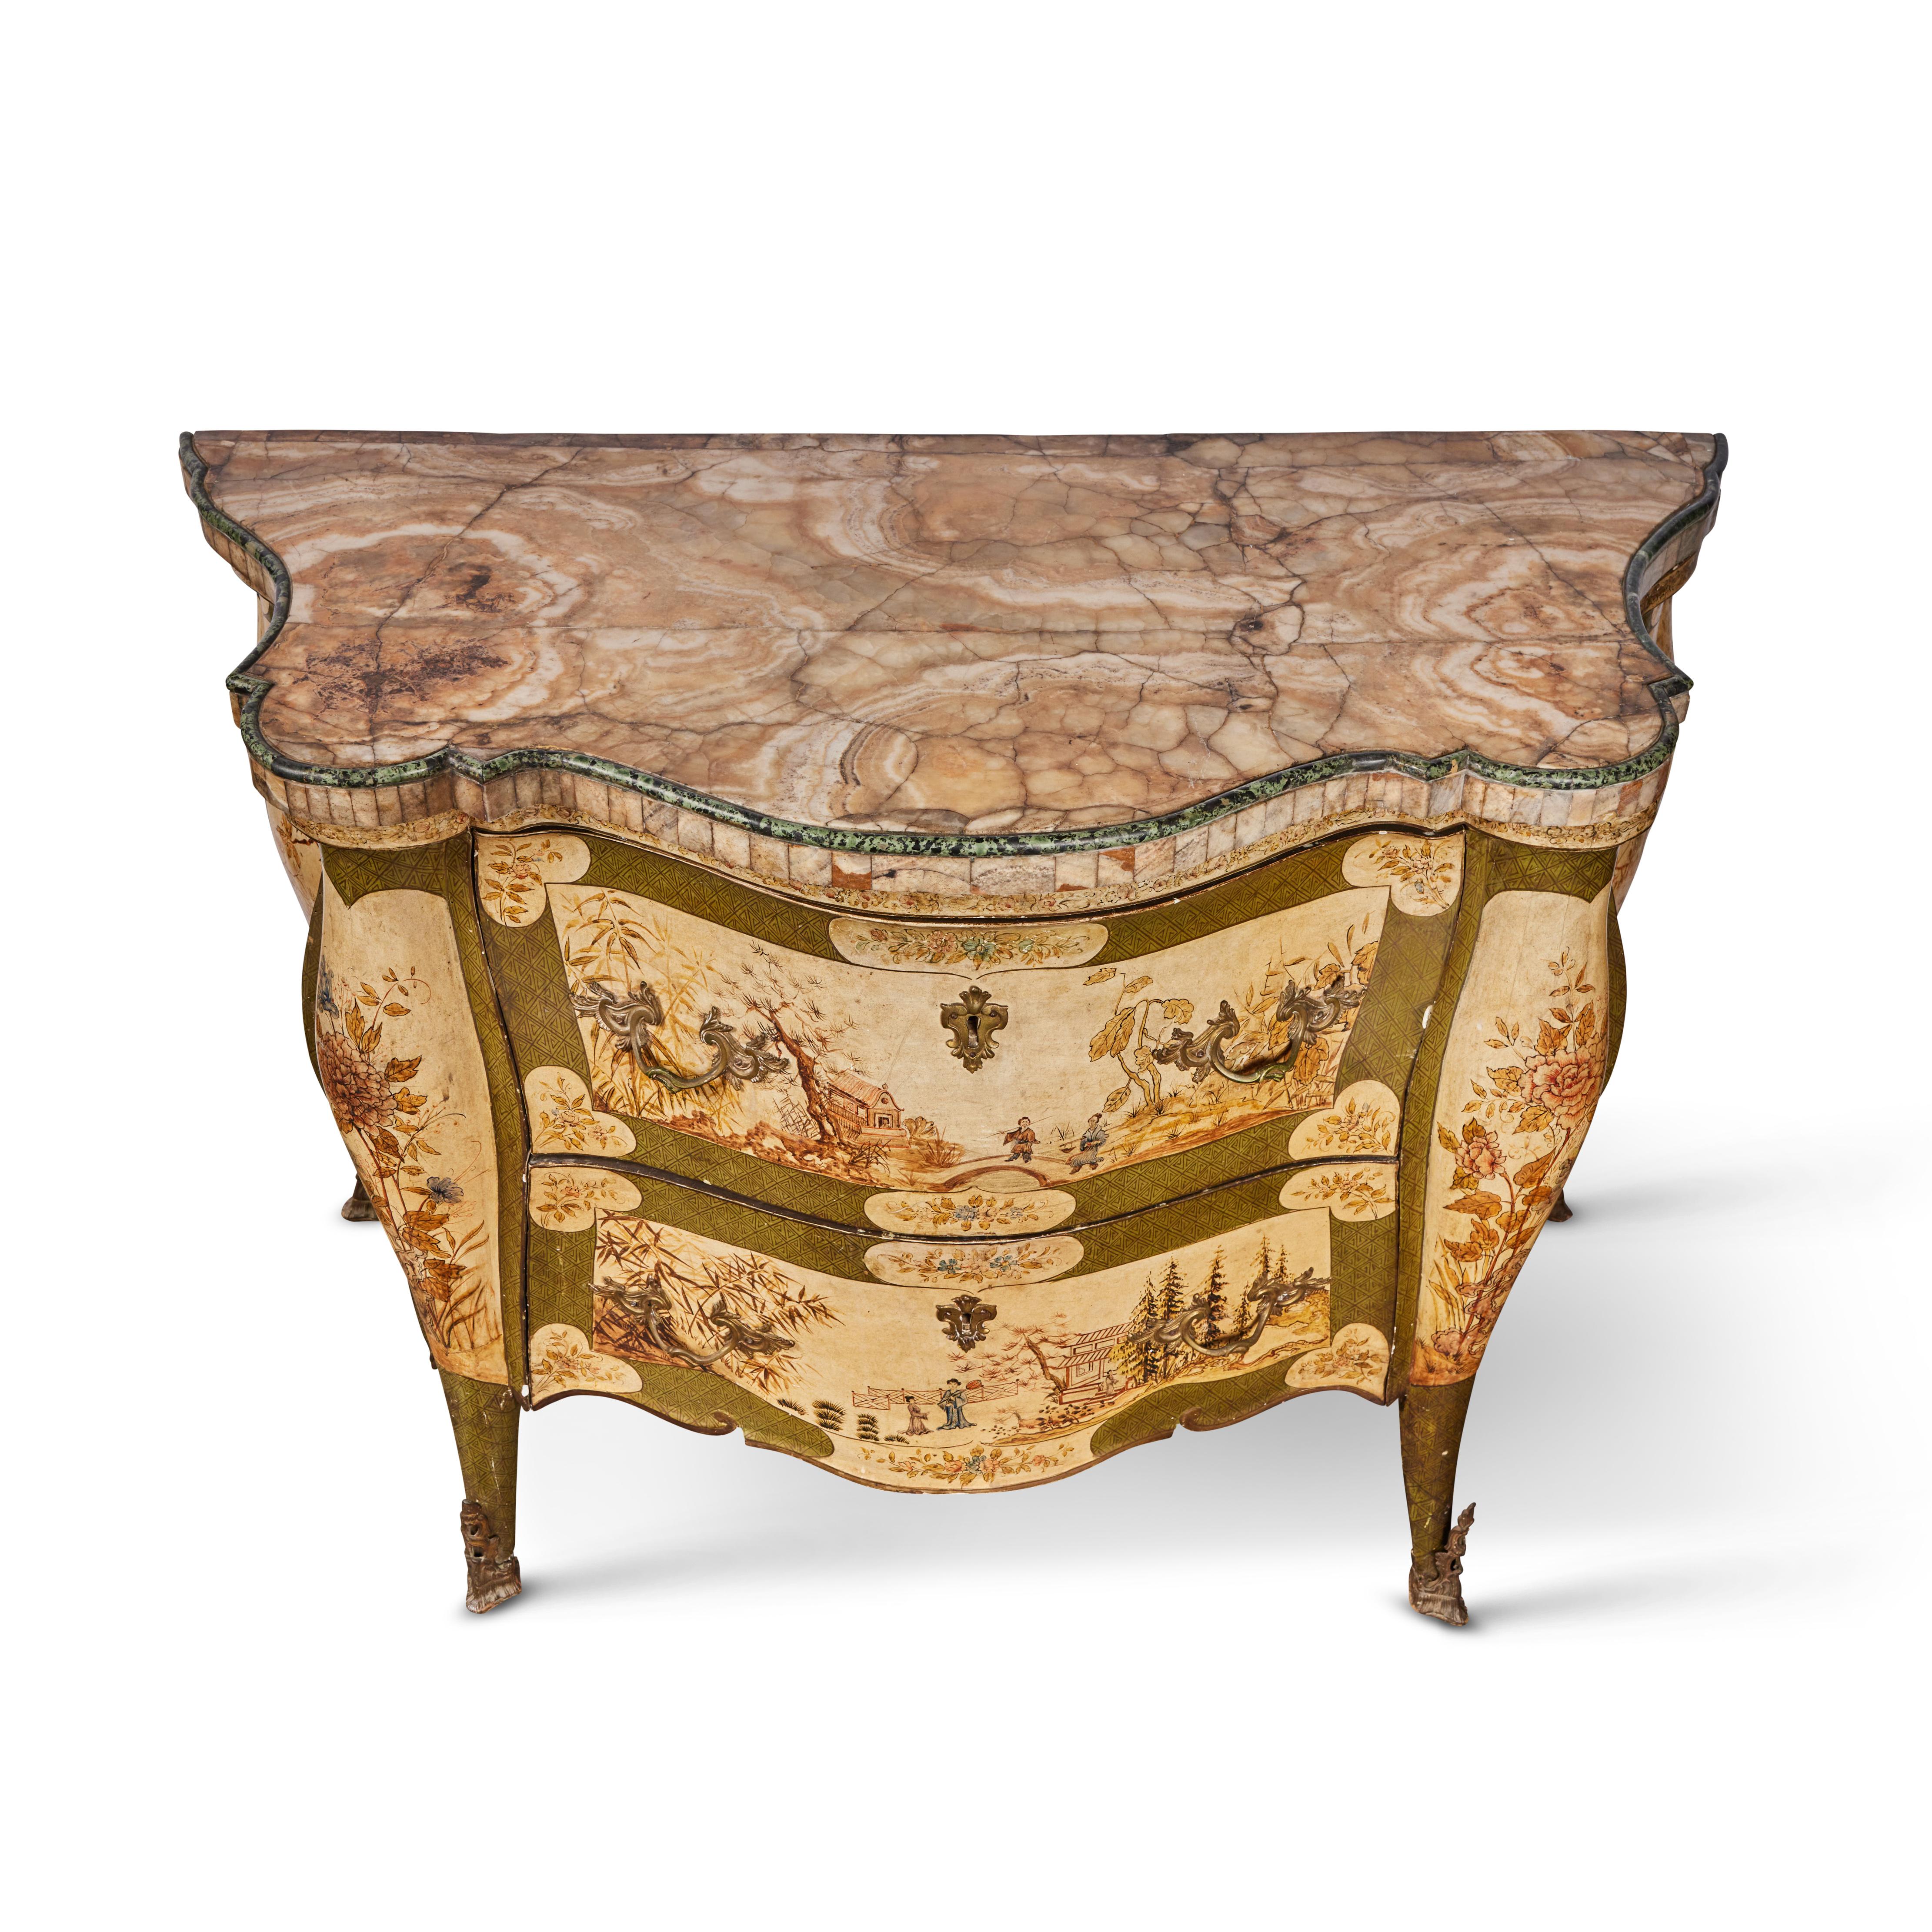 A most unusual and rare, c. 1800, hand-carved and painted, serpentine, Venetian, Chinoiserie commode in the bombé style, with rounded legs terminating in ormolu feet. The whole richly decorated in garden scenes with blossoms, foliage, butterflies